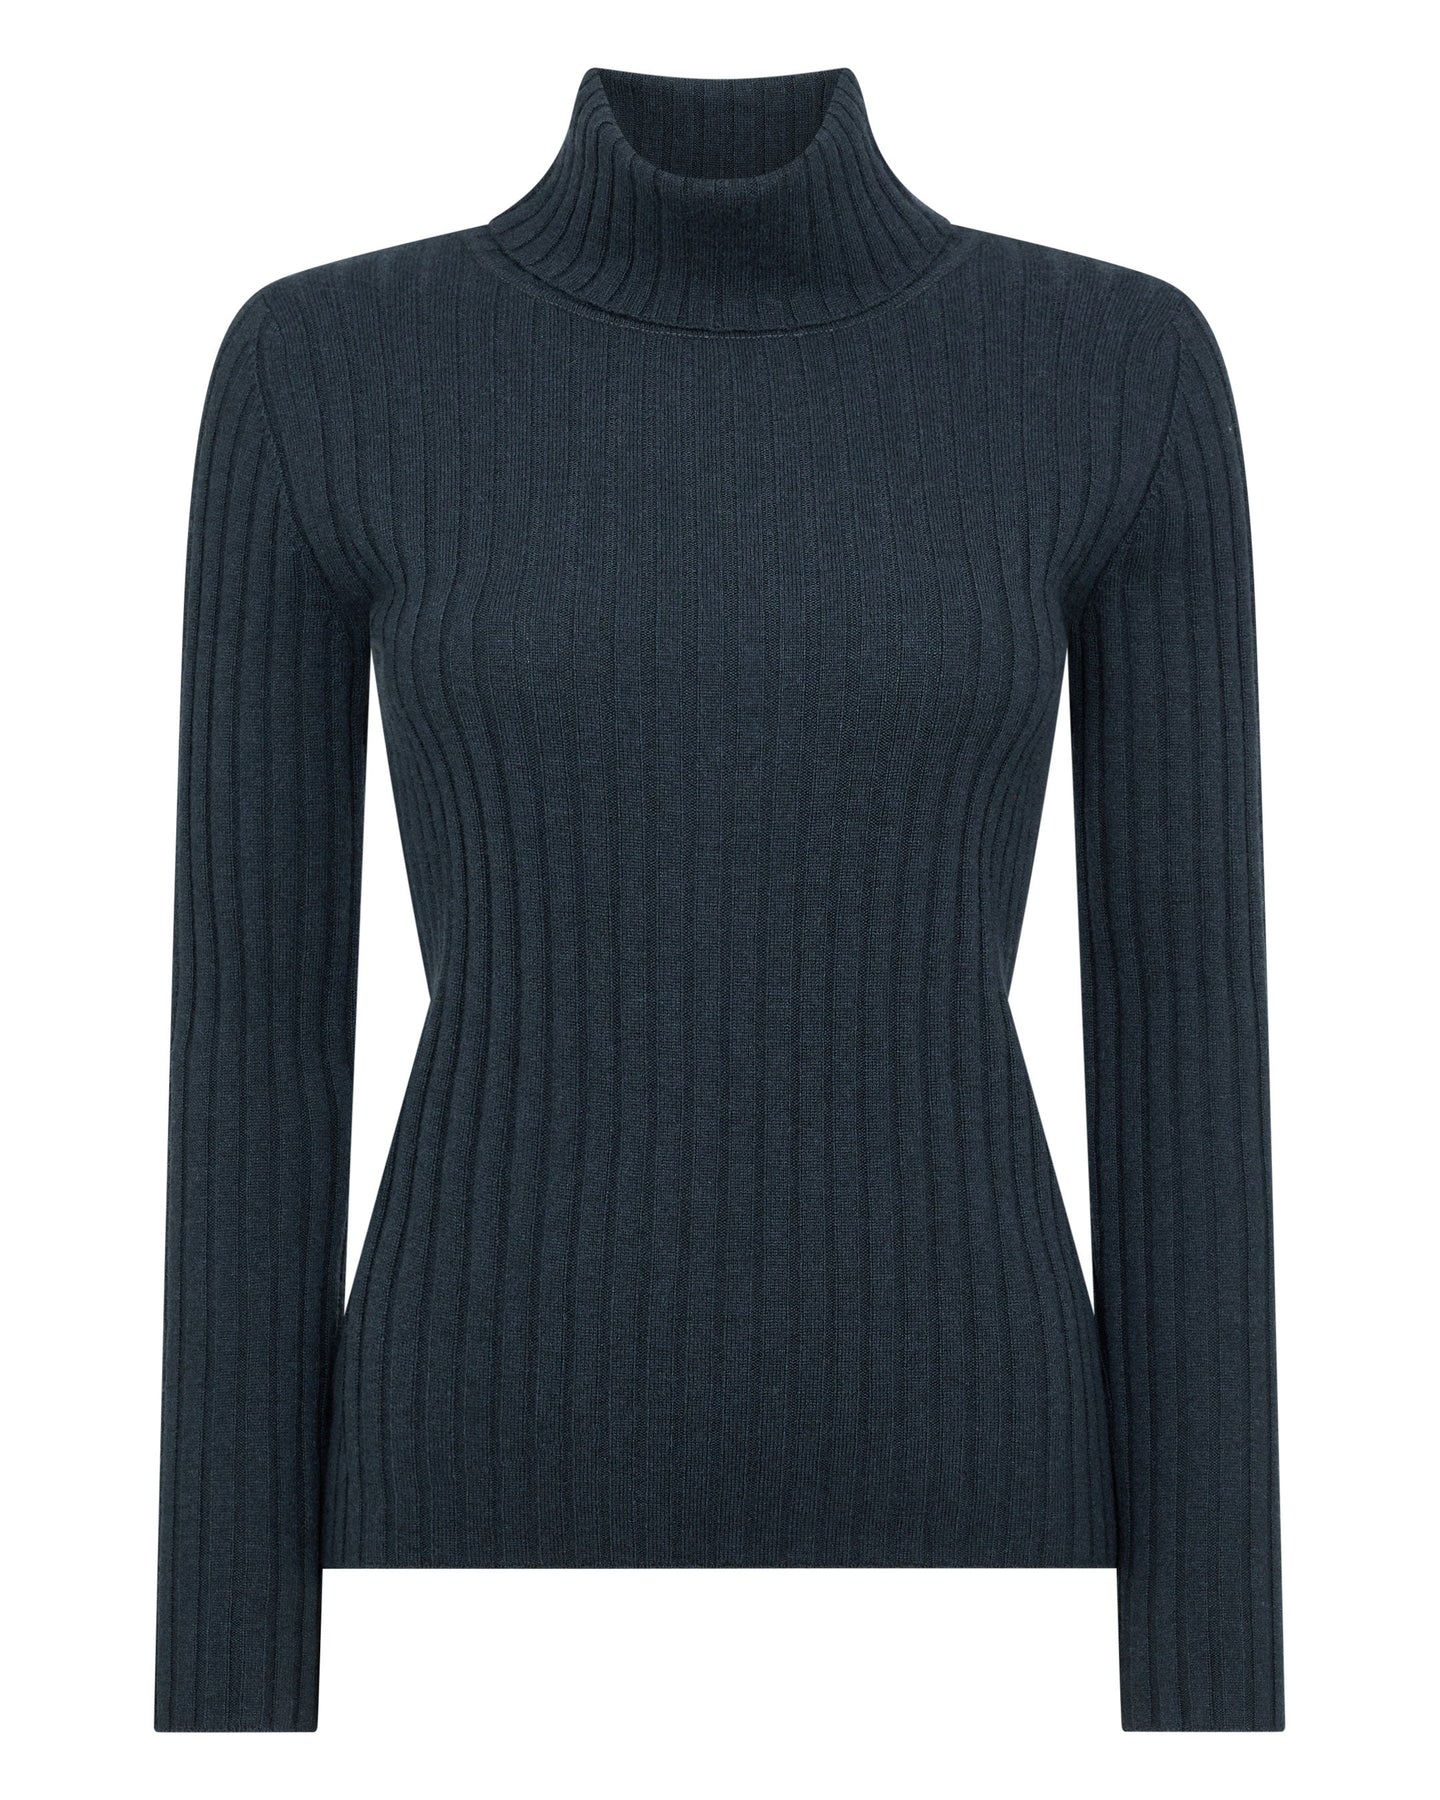 N.Peal Women's Ribbed Turtle Neck Cashmere Sweater Grigio Blue